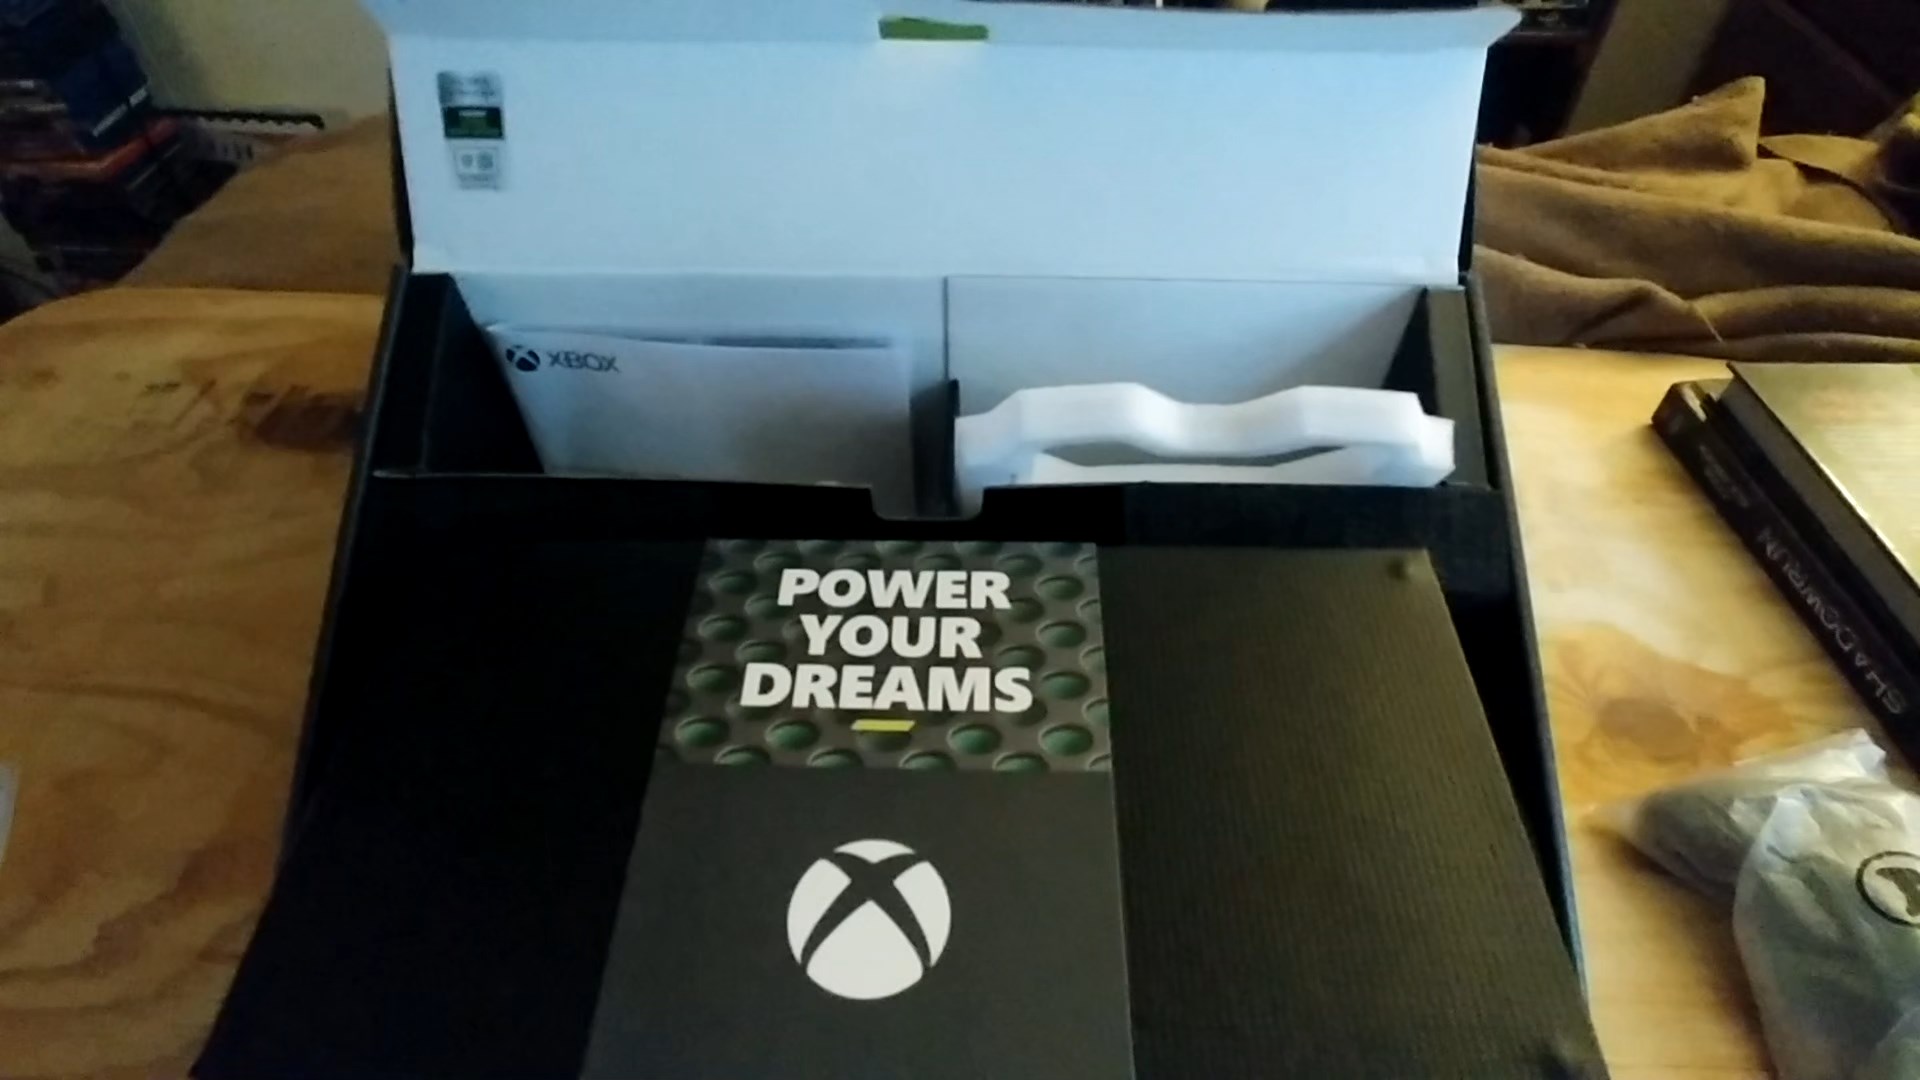 XBOX SERIES X - UNBOXING (POWER YOUR DREAMS) 